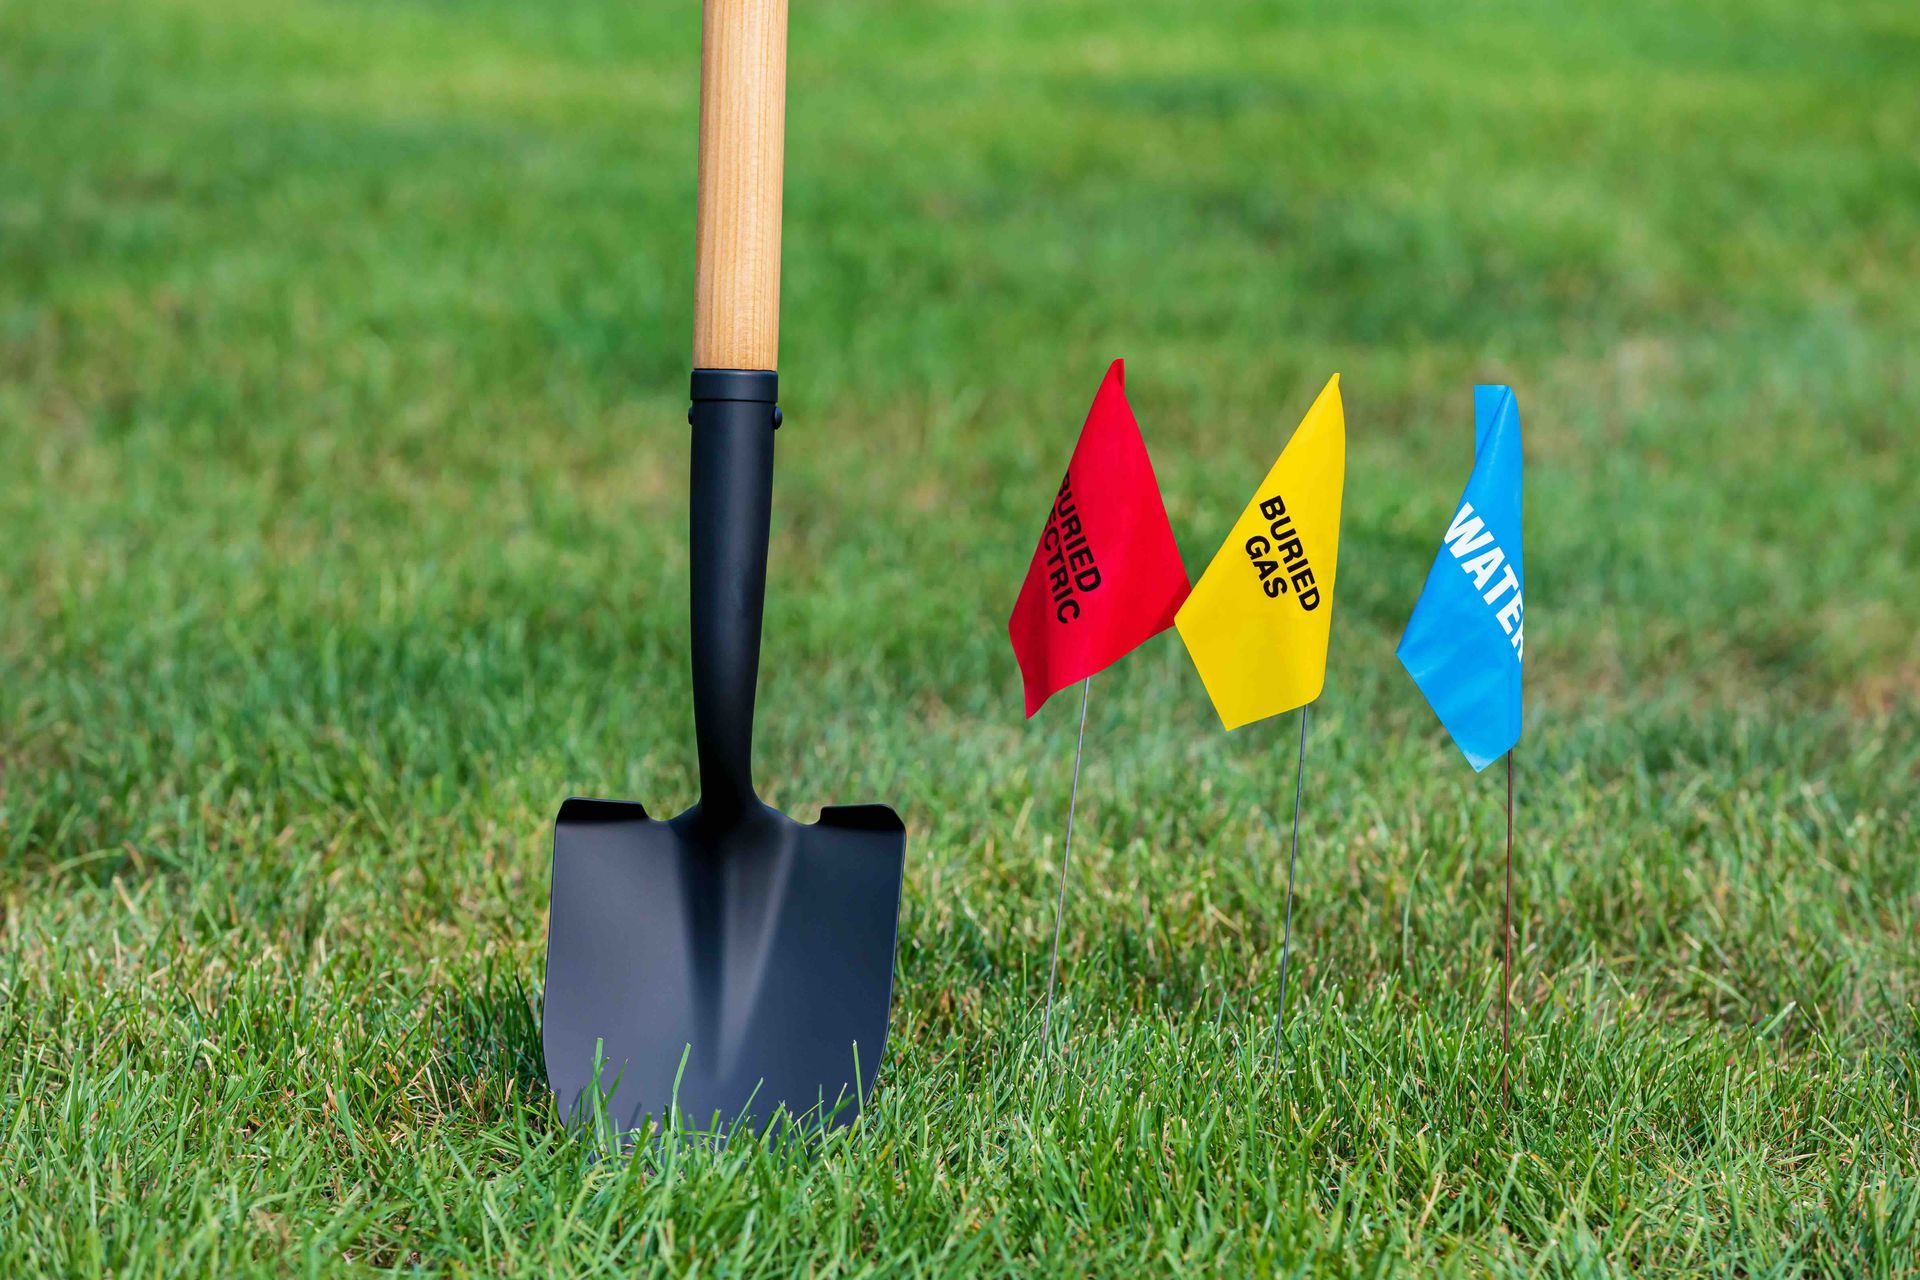 a shovel stabbed in the ground next to electrical, gas, and water marking flags.